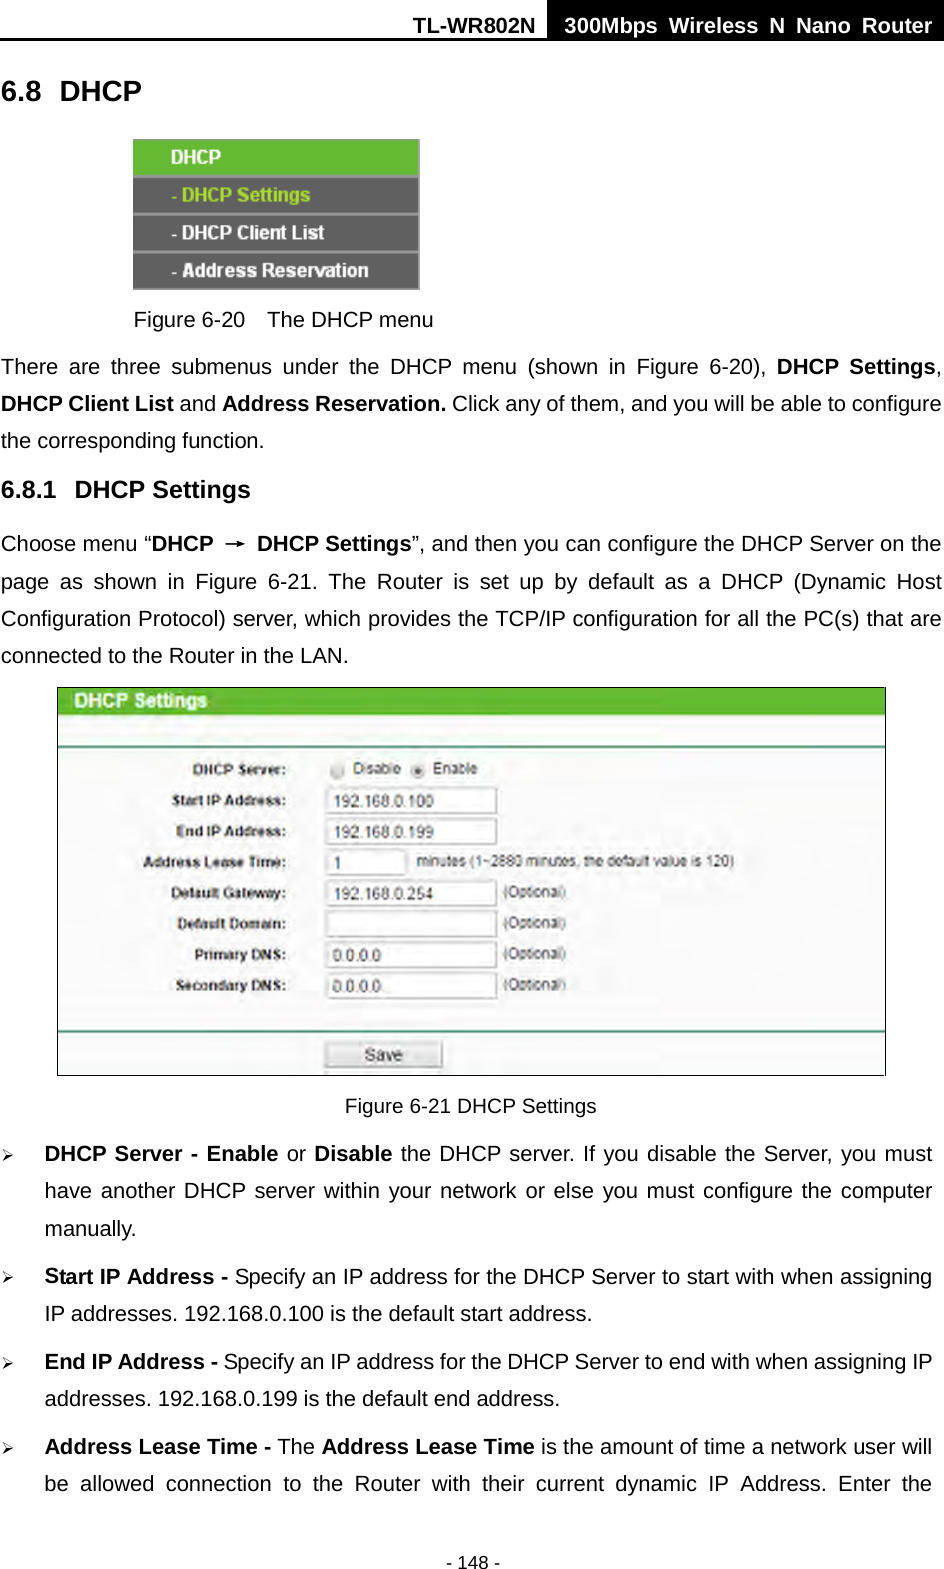 TL-WR802N  300Mbps Wireless N Nano Router  6.8 DHCP  Figure 6-20  The DHCP menu There are three submenus under the DHCP menu (shown in Figure  6-20),  DHCP Settings, DHCP Client List and Address Reservation. Click any of them, and you will be able to configure the corresponding function. 6.8.1 DHCP Settings Choose menu “DHCP  → DHCP Settings”, and then you can configure the DHCP Server on the page  as  shown in Figure  6-21.  The  Router is set up by default as a DHCP (Dynamic Host Configuration Protocol) server, which provides the TCP/IP configuration for all the PC(s) that are connected to the Router in the LAN.    Figure 6-21 DHCP Settings  DHCP Server - Enable or Disable the DHCP server. If you disable the Server, you must have another DHCP server within your network or else you must configure the computer manually.  Start IP Address - Specify an IP address for the DHCP Server to start with when assigning IP addresses. 192.168.0.100 is the default start address.  End IP Address - Specify an IP address for the DHCP Server to end with when assigning IP addresses. 192.168.0.199 is the default end address.  Address Lease Time - The Address Lease Time is the amount of time a network user will be allowed connection to the Router with their current dynamic IP Address. Enter the - 148 - 